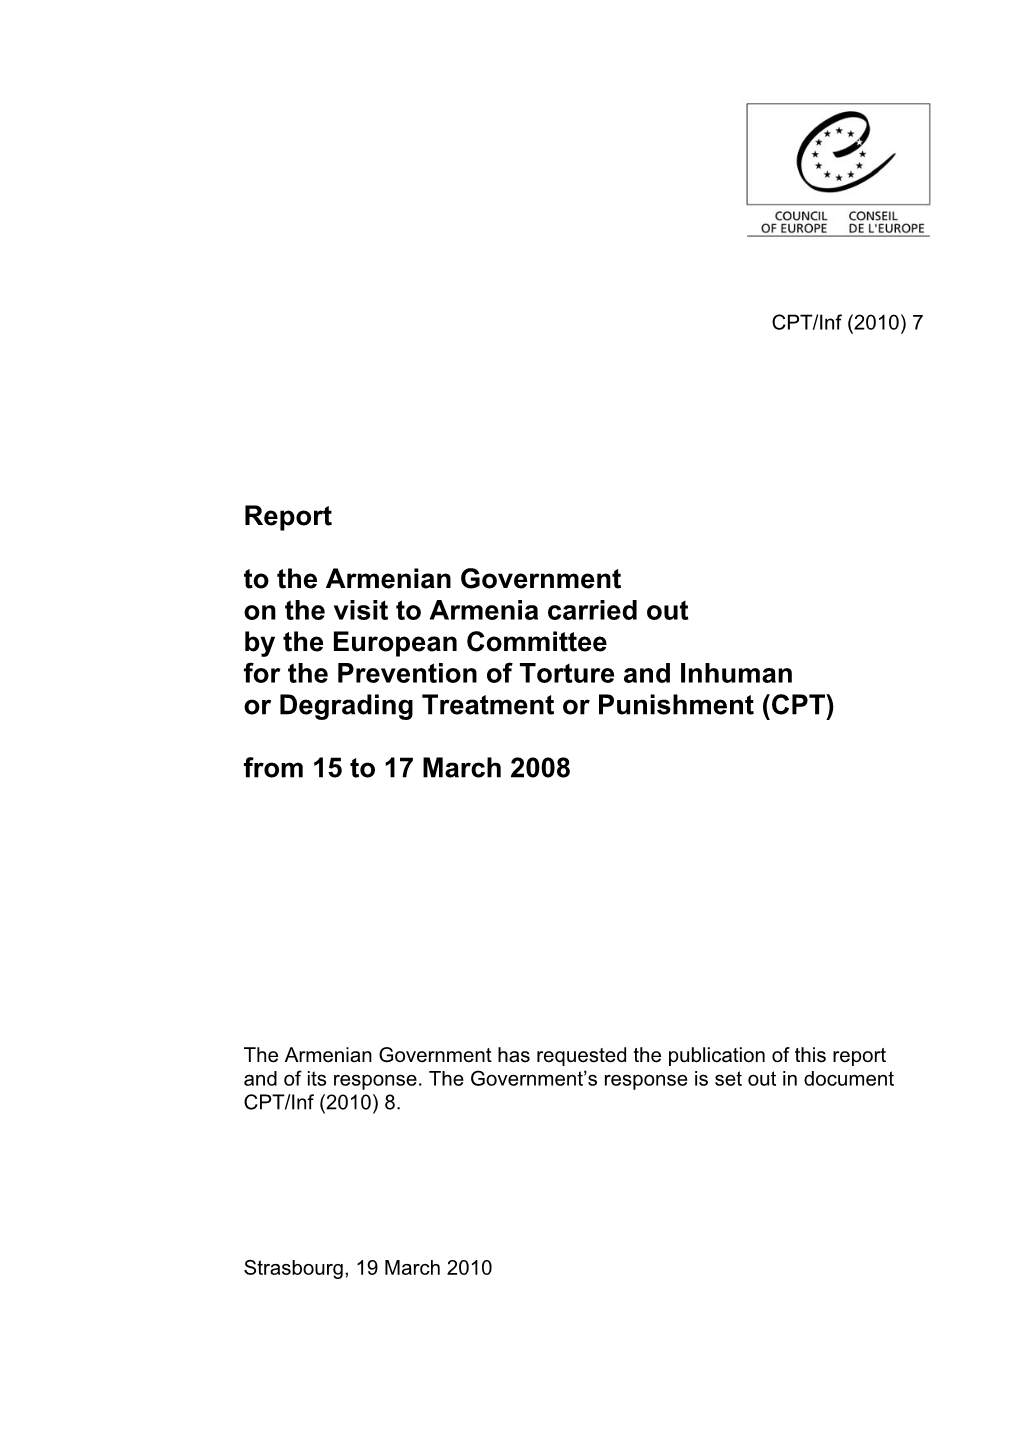 Report to the Armenian Government on the Visit to Armenia